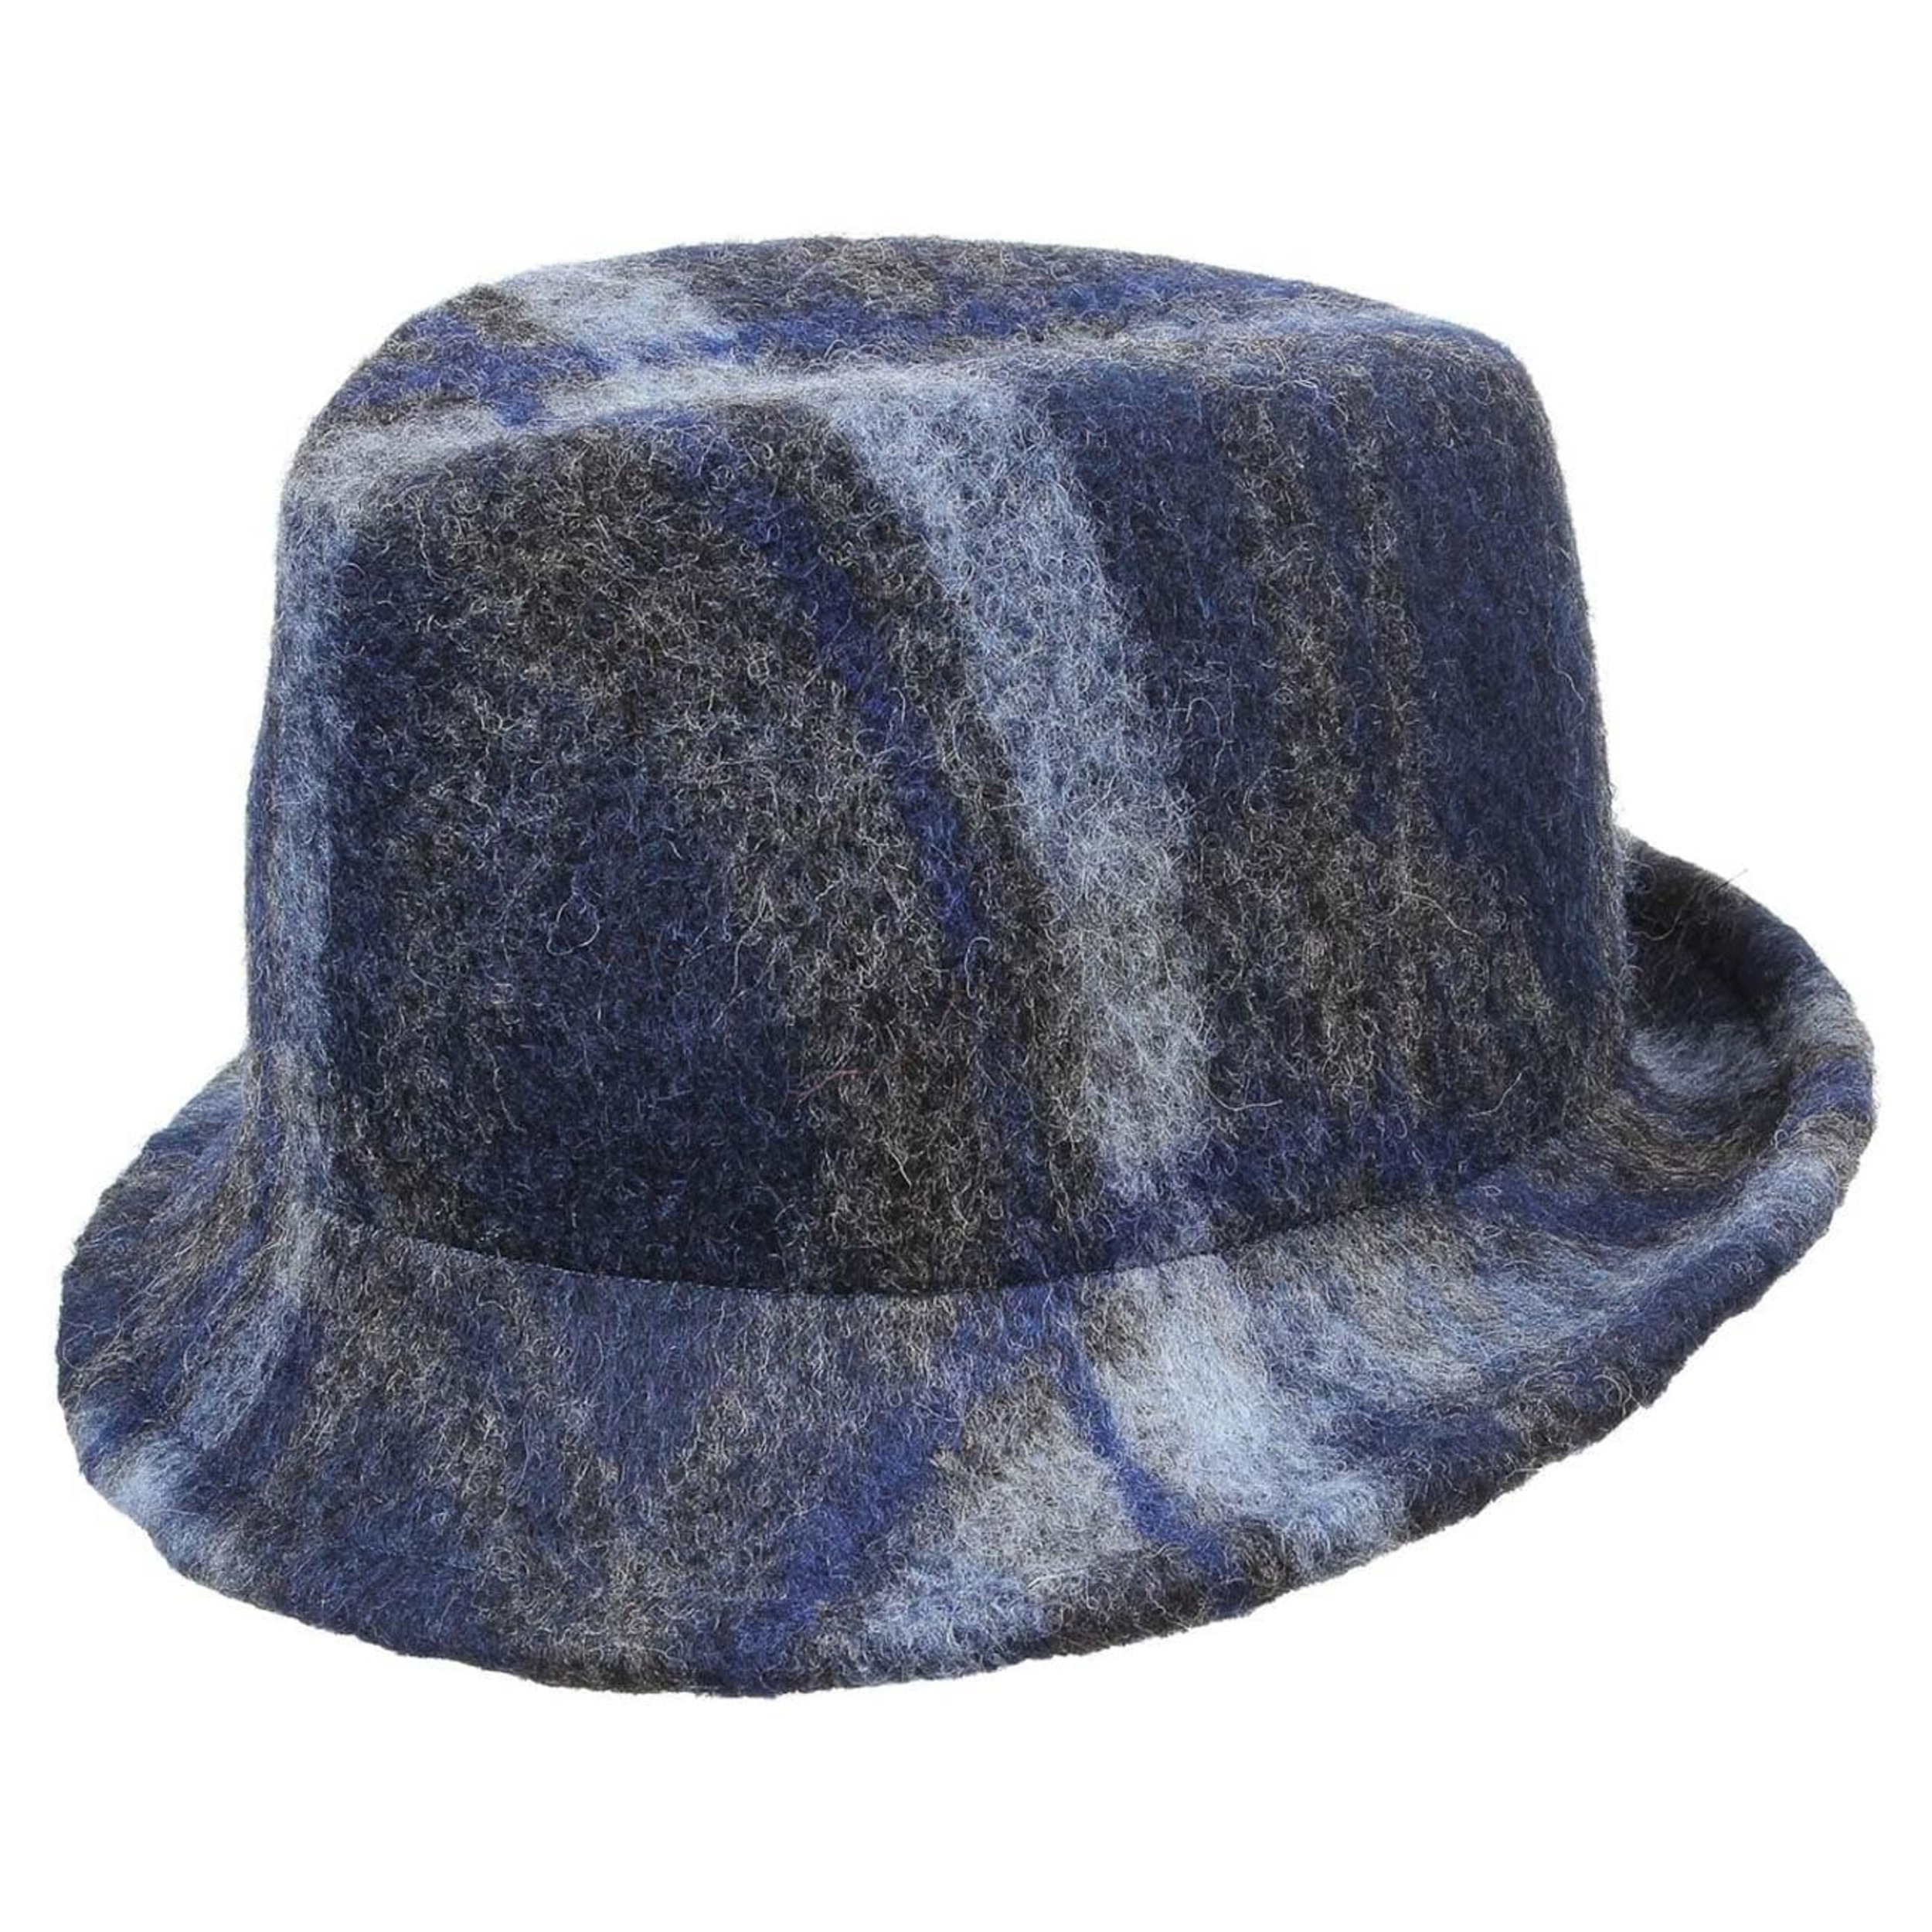 Smilla Trilby by bedacht - 39,00 €